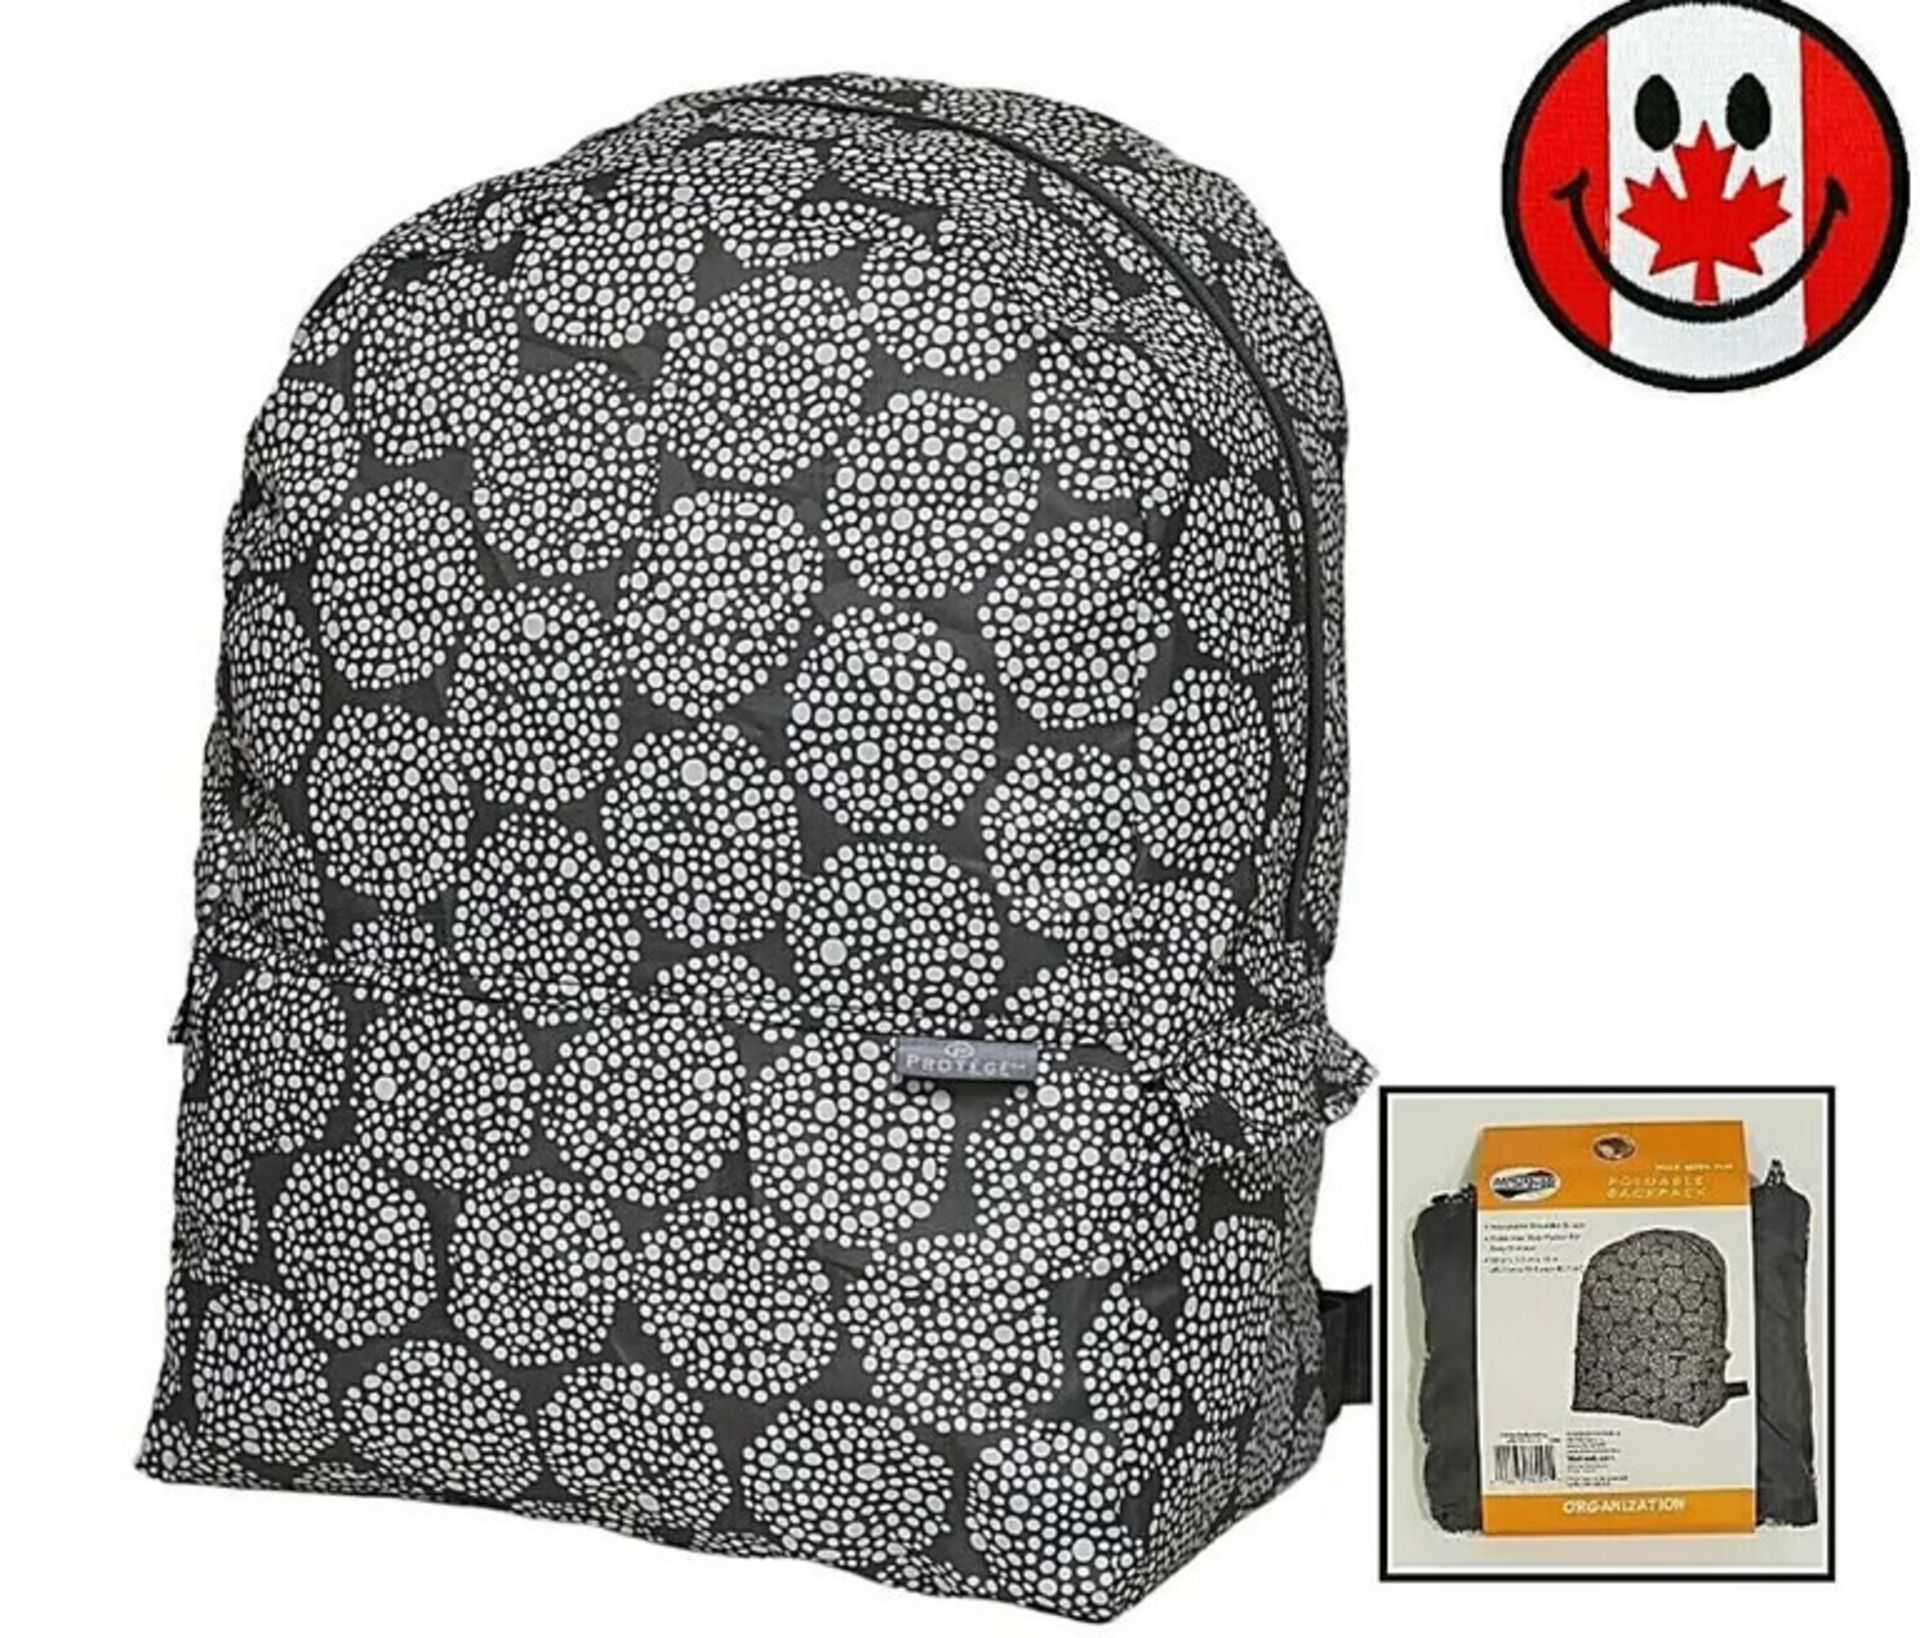 JOBLOT 200 X NEW BACKPACKS - MIX OF RED AND GREY - 45.7 X 40.7CM - - Image 3 of 4